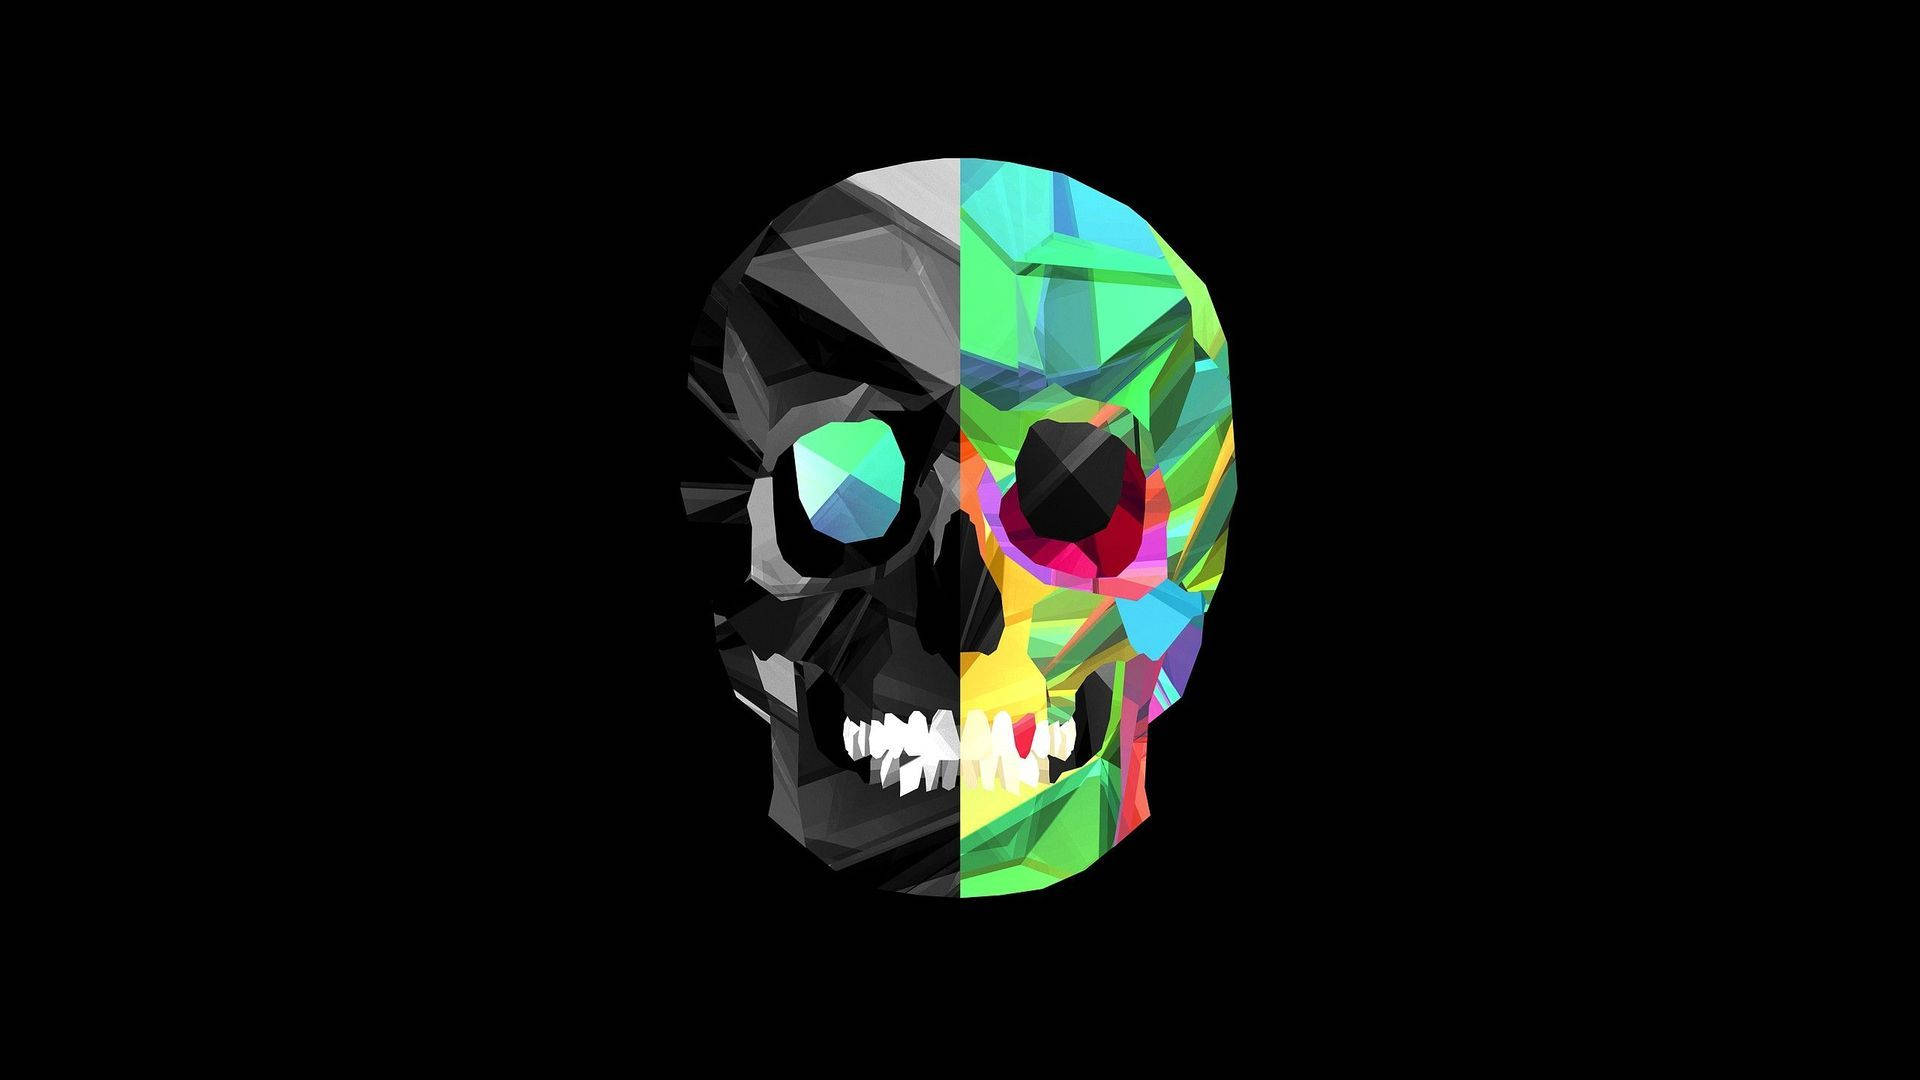 "Edgy Skull Art - Convey your unique style with this artistic skull profile picture." Wallpaper